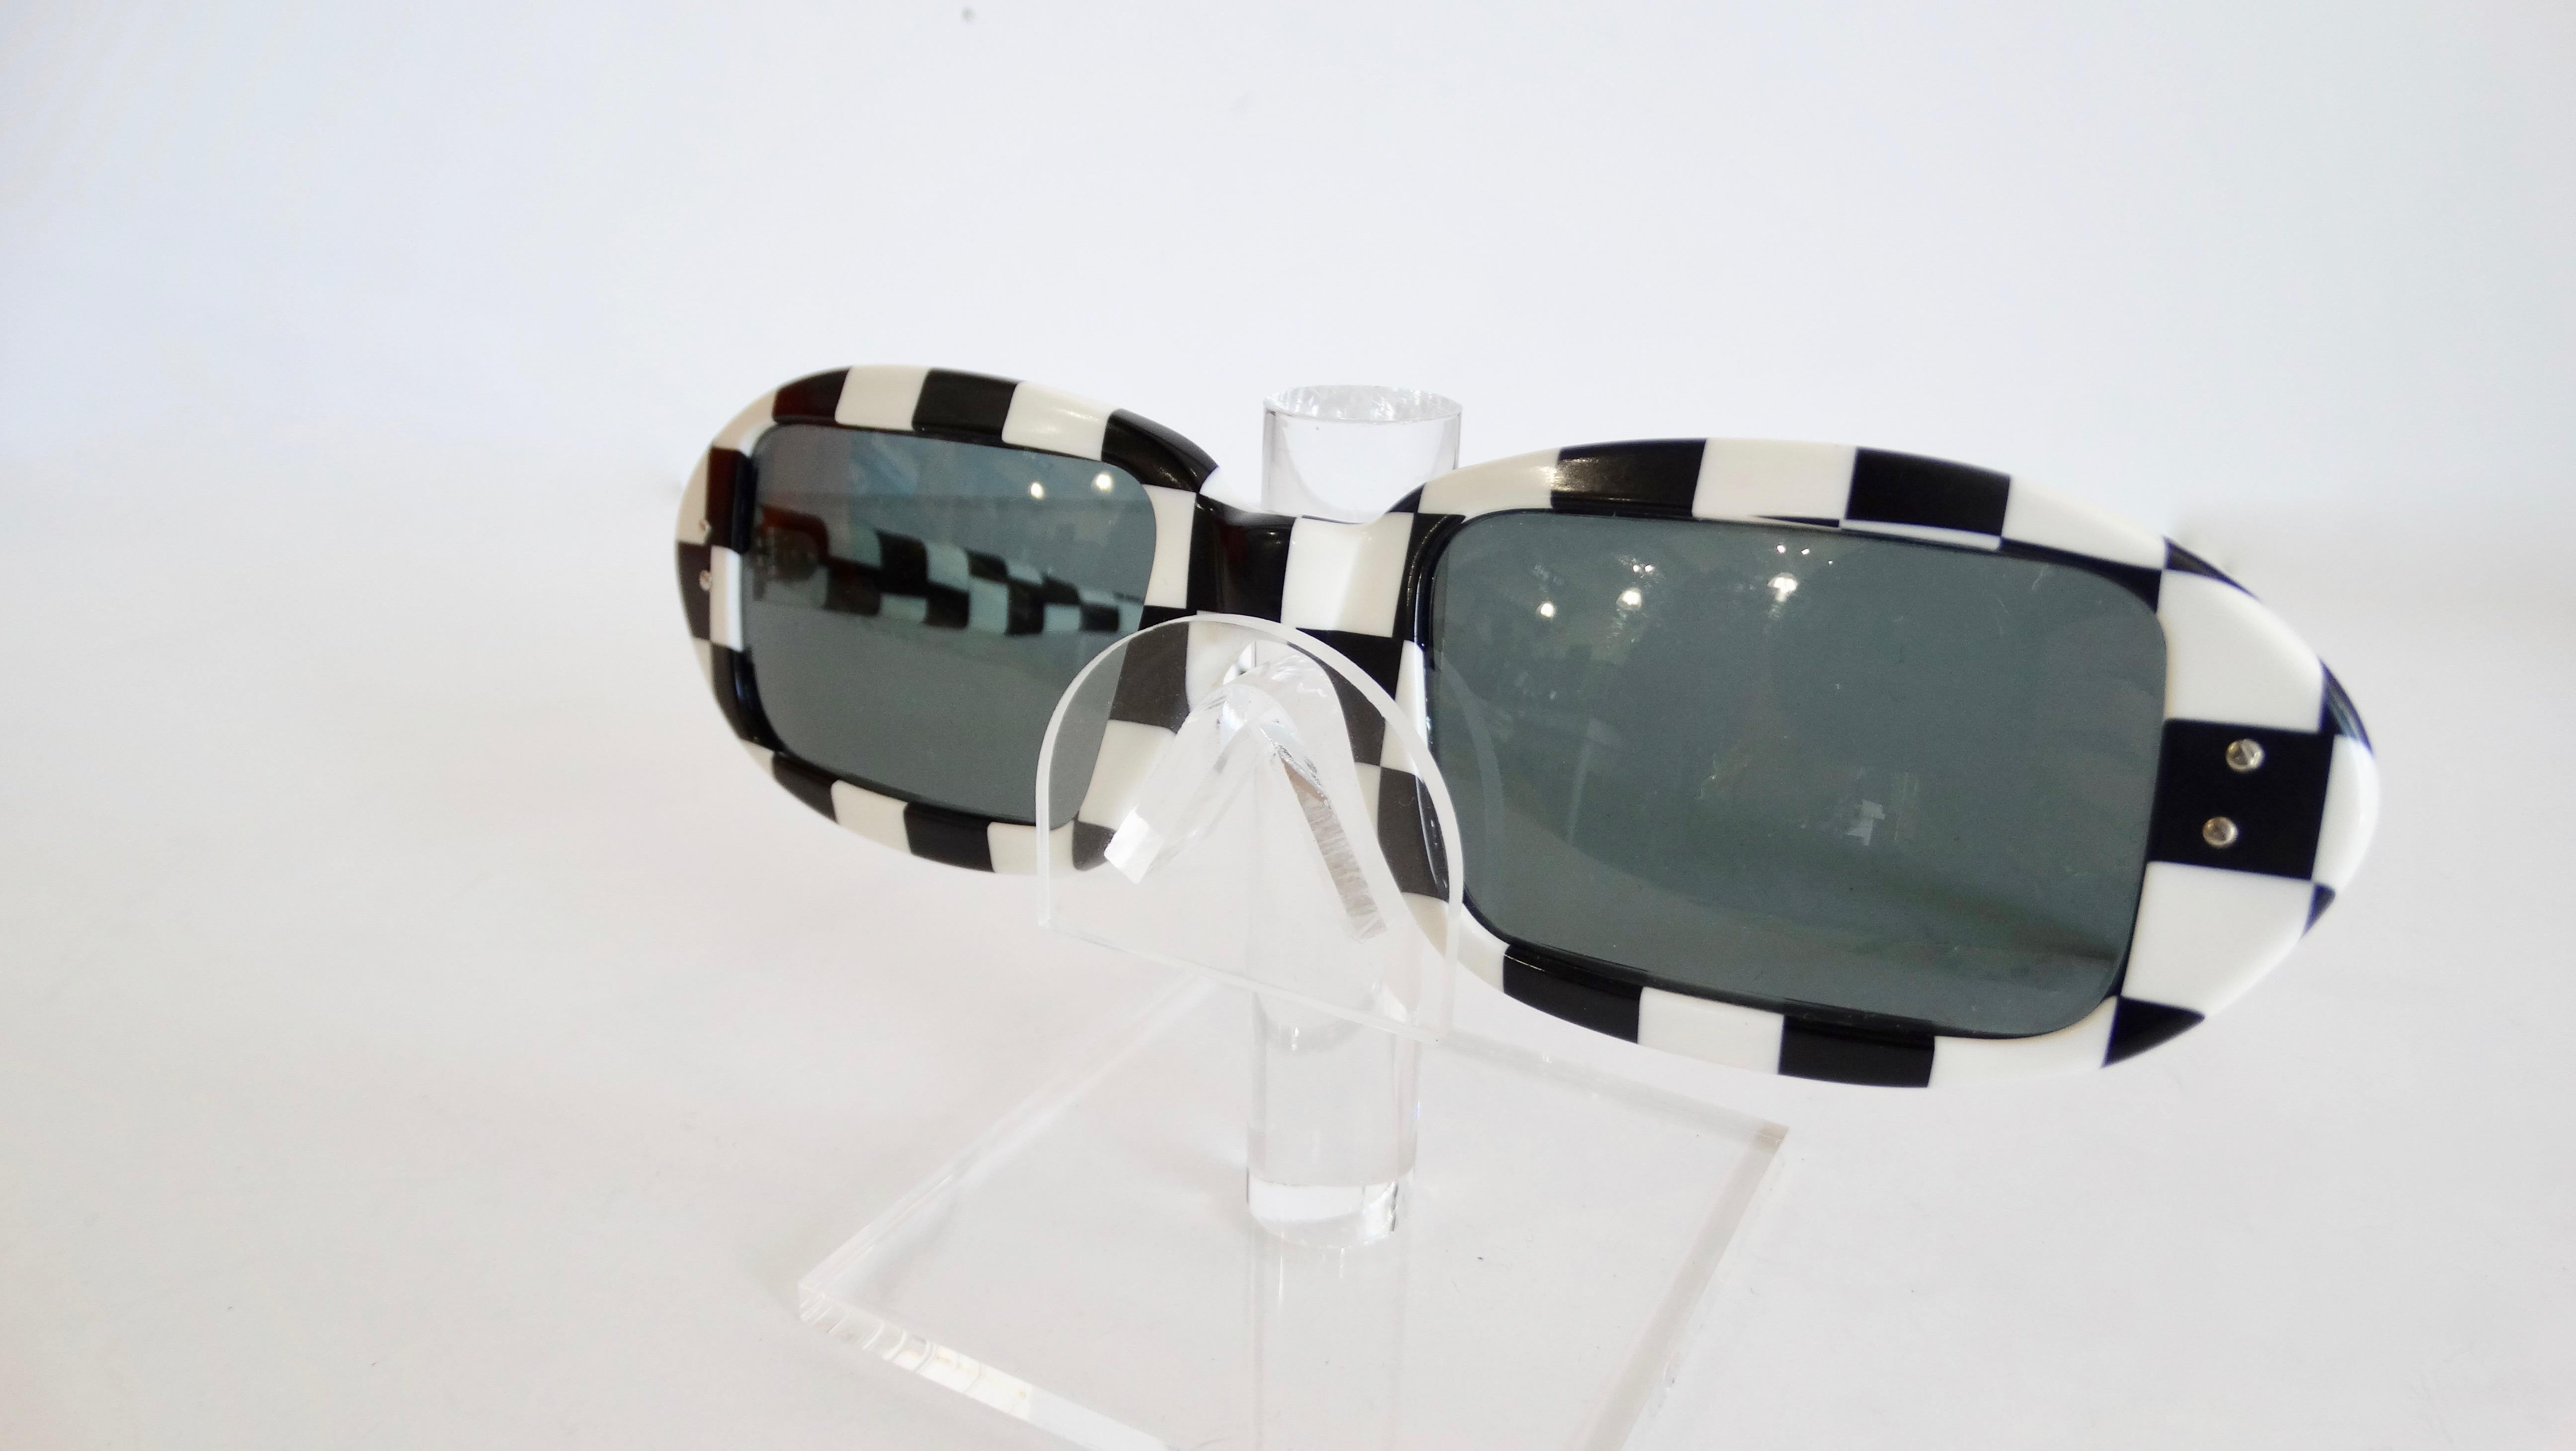 Spice up your sunglasses game with these amazing Mod sunnies! Circa 1960s, these Frame France sunglasses highlight the Mod era and feature a black and white checkered design, rounded rectangular frame, and black lenses. The perfect pair of